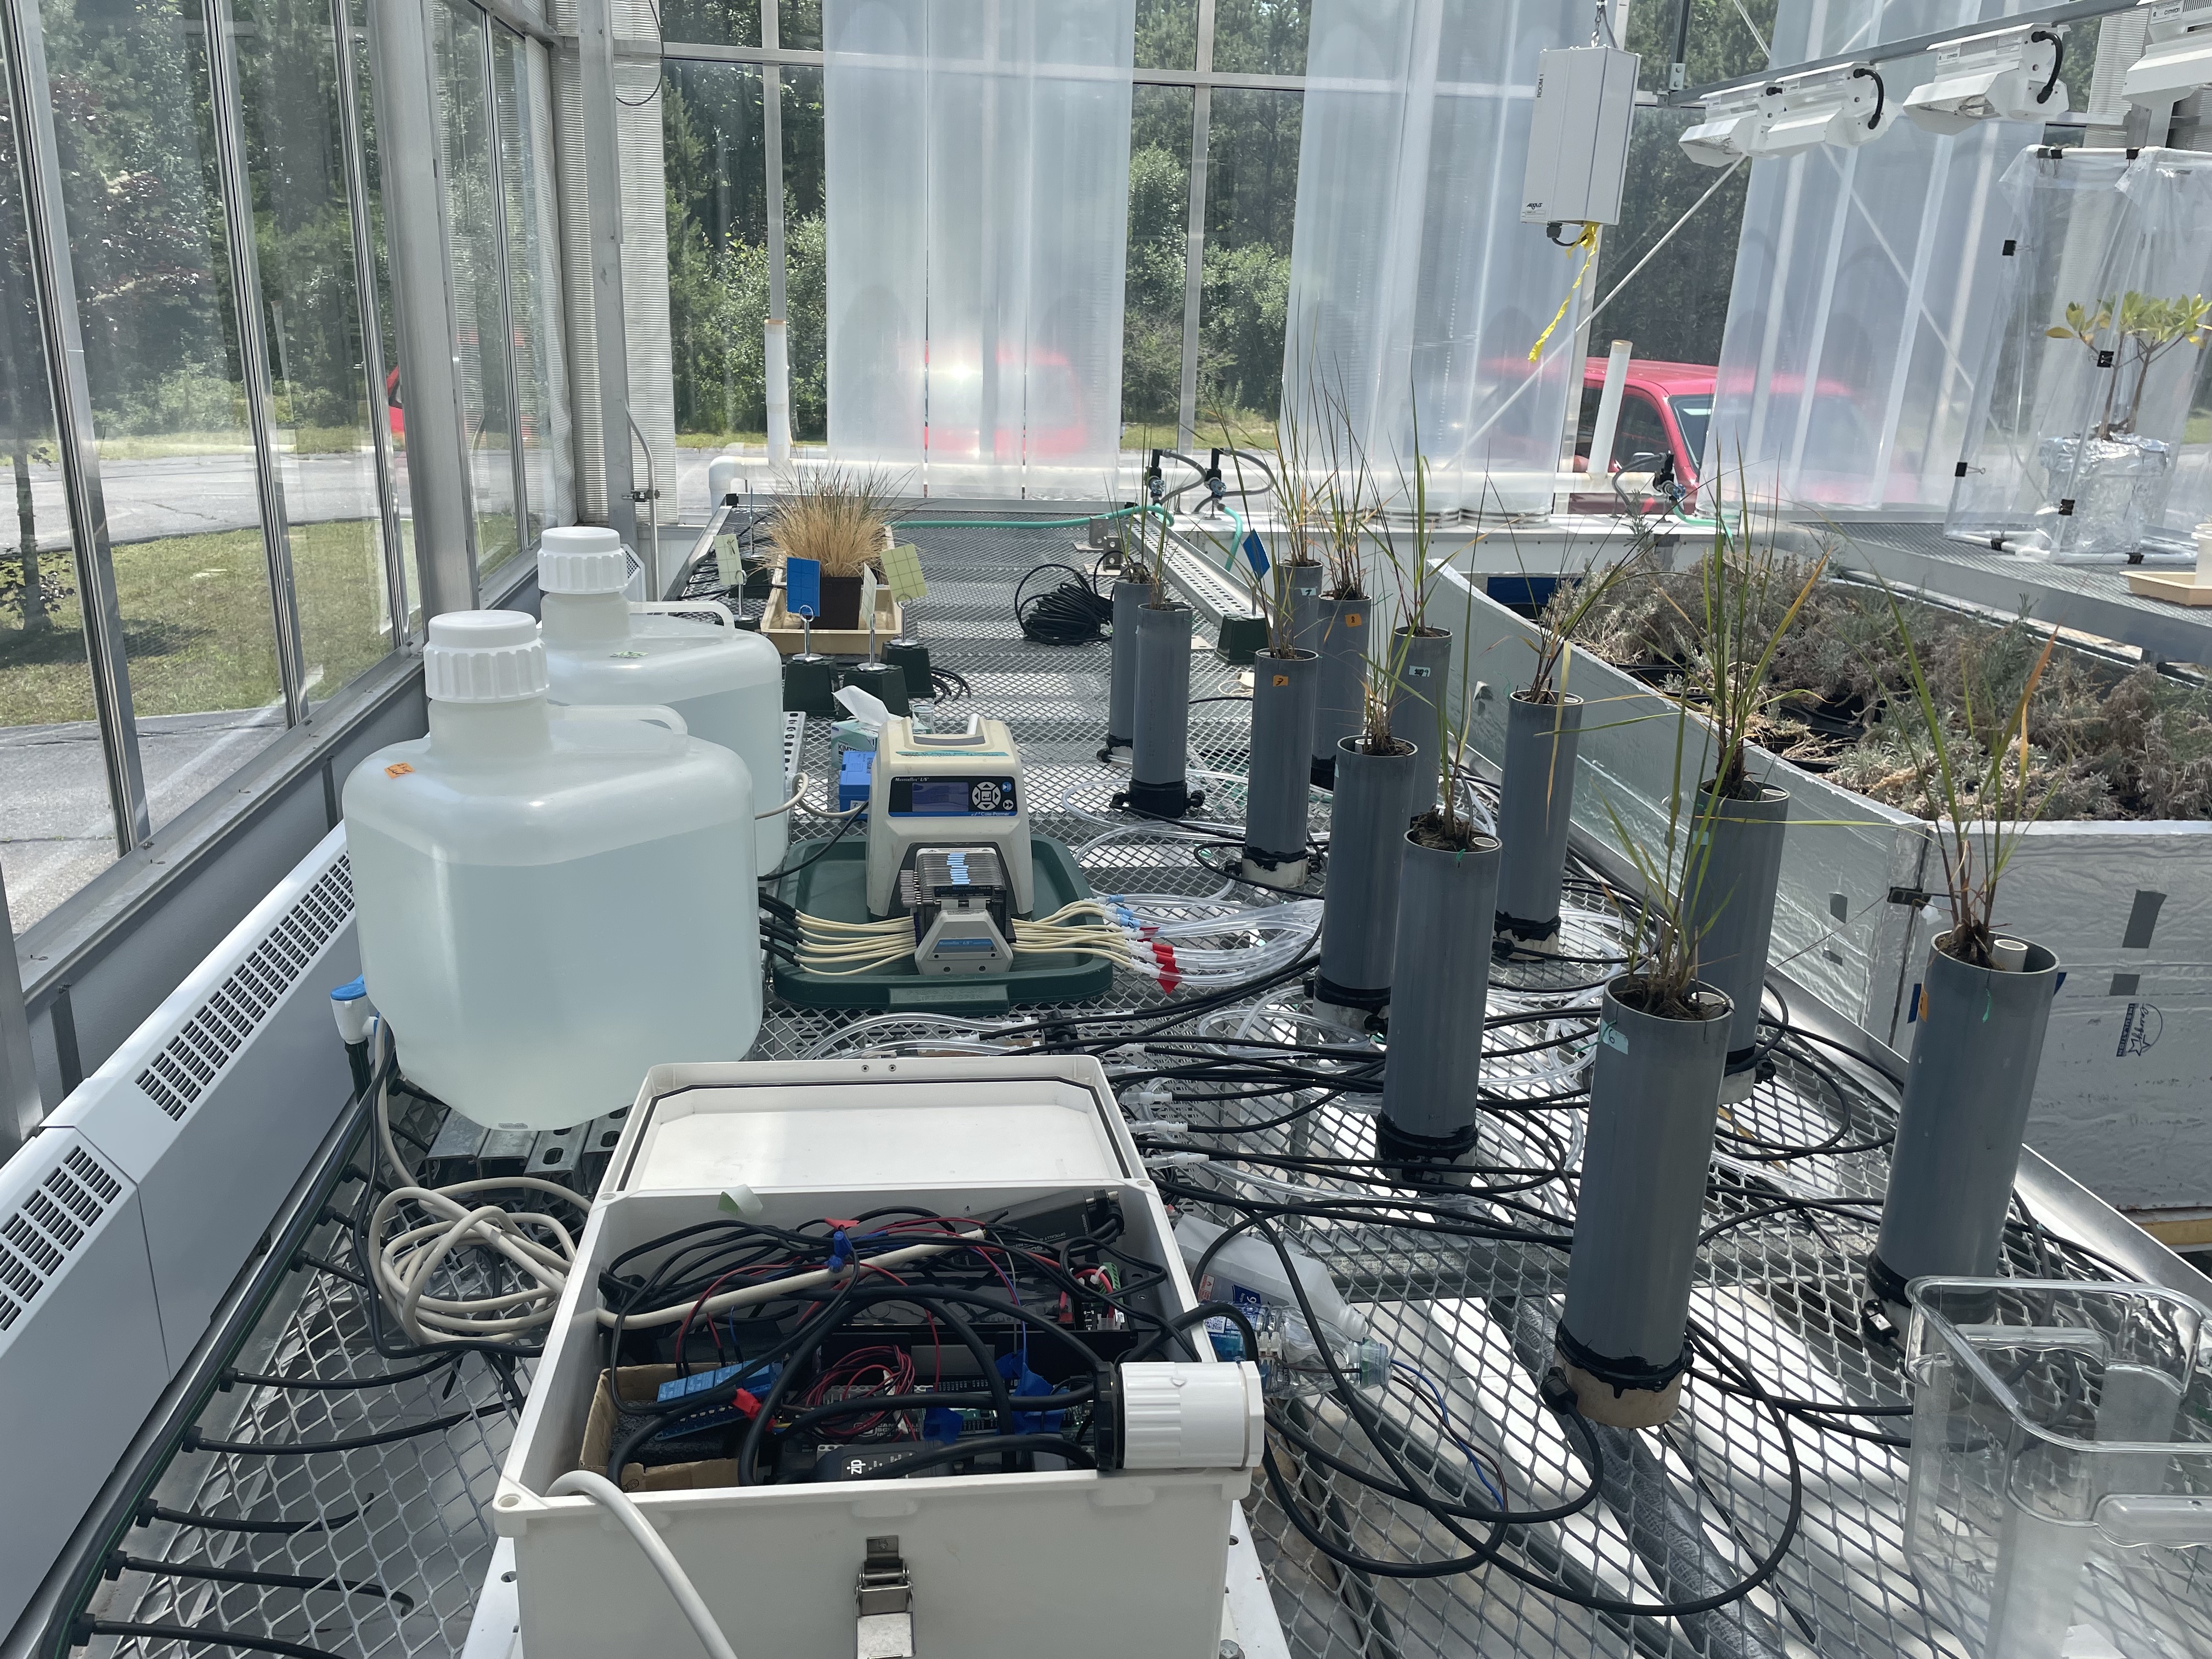 A custom built, artificial "tidal" system in the MBL greenhouse. Samples of cordgrass are in different containers and exposed to different salinity levels.